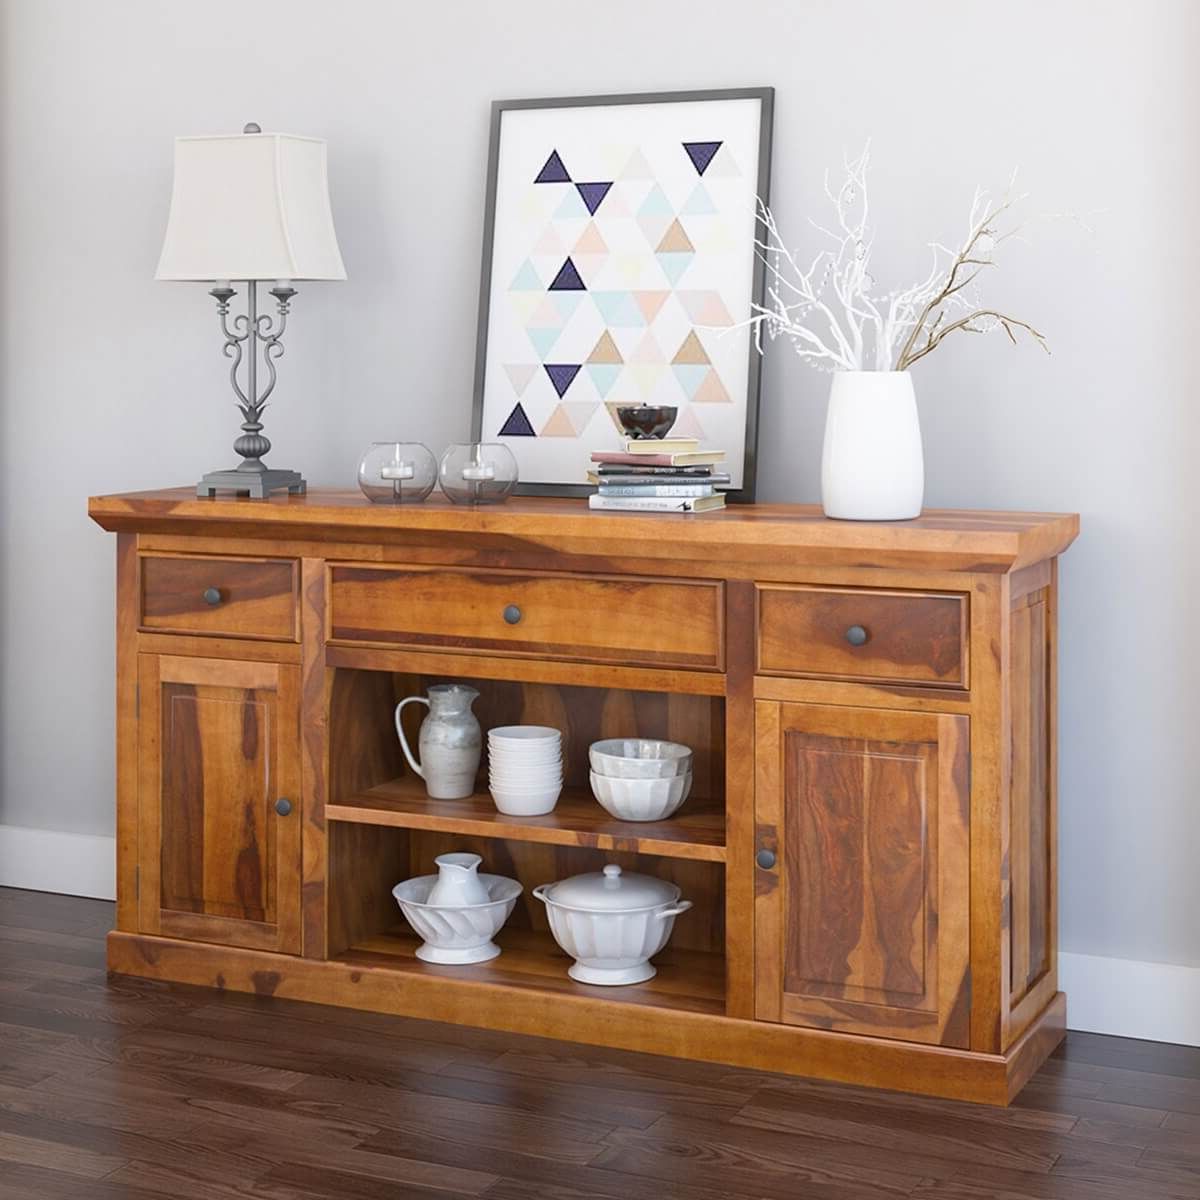 Appalachian Rustic Solid Wood Dining Room Large Sideboard Cabinet Inside 2020 Wide Buffet Cabinets For Dining Room (View 7 of 15)